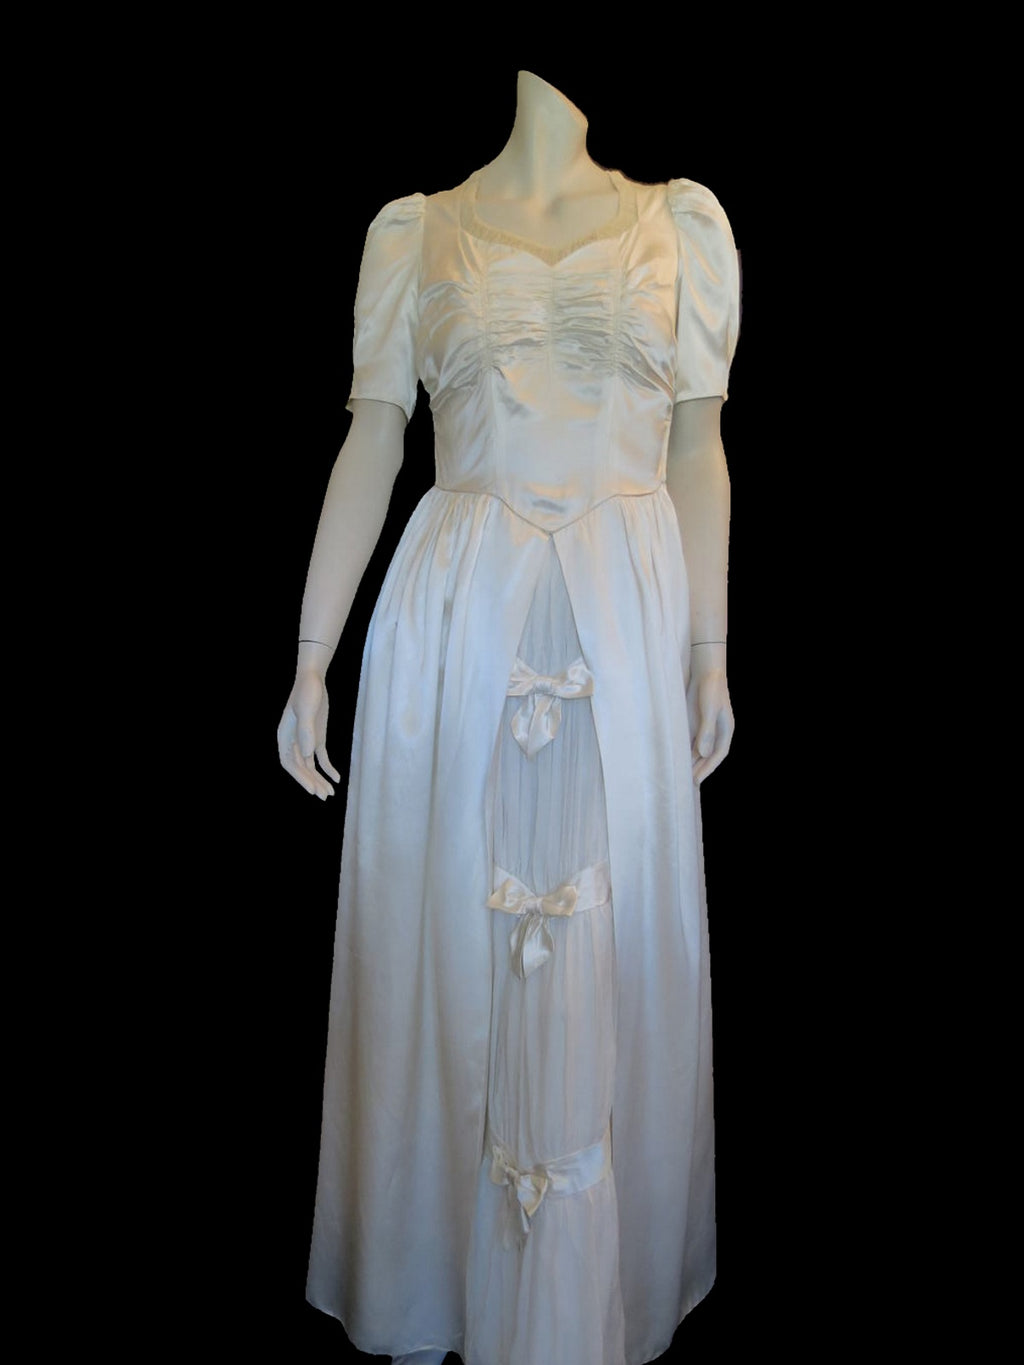 1940s vintage rayon satin wedding dress with ruched bodice and bow trim